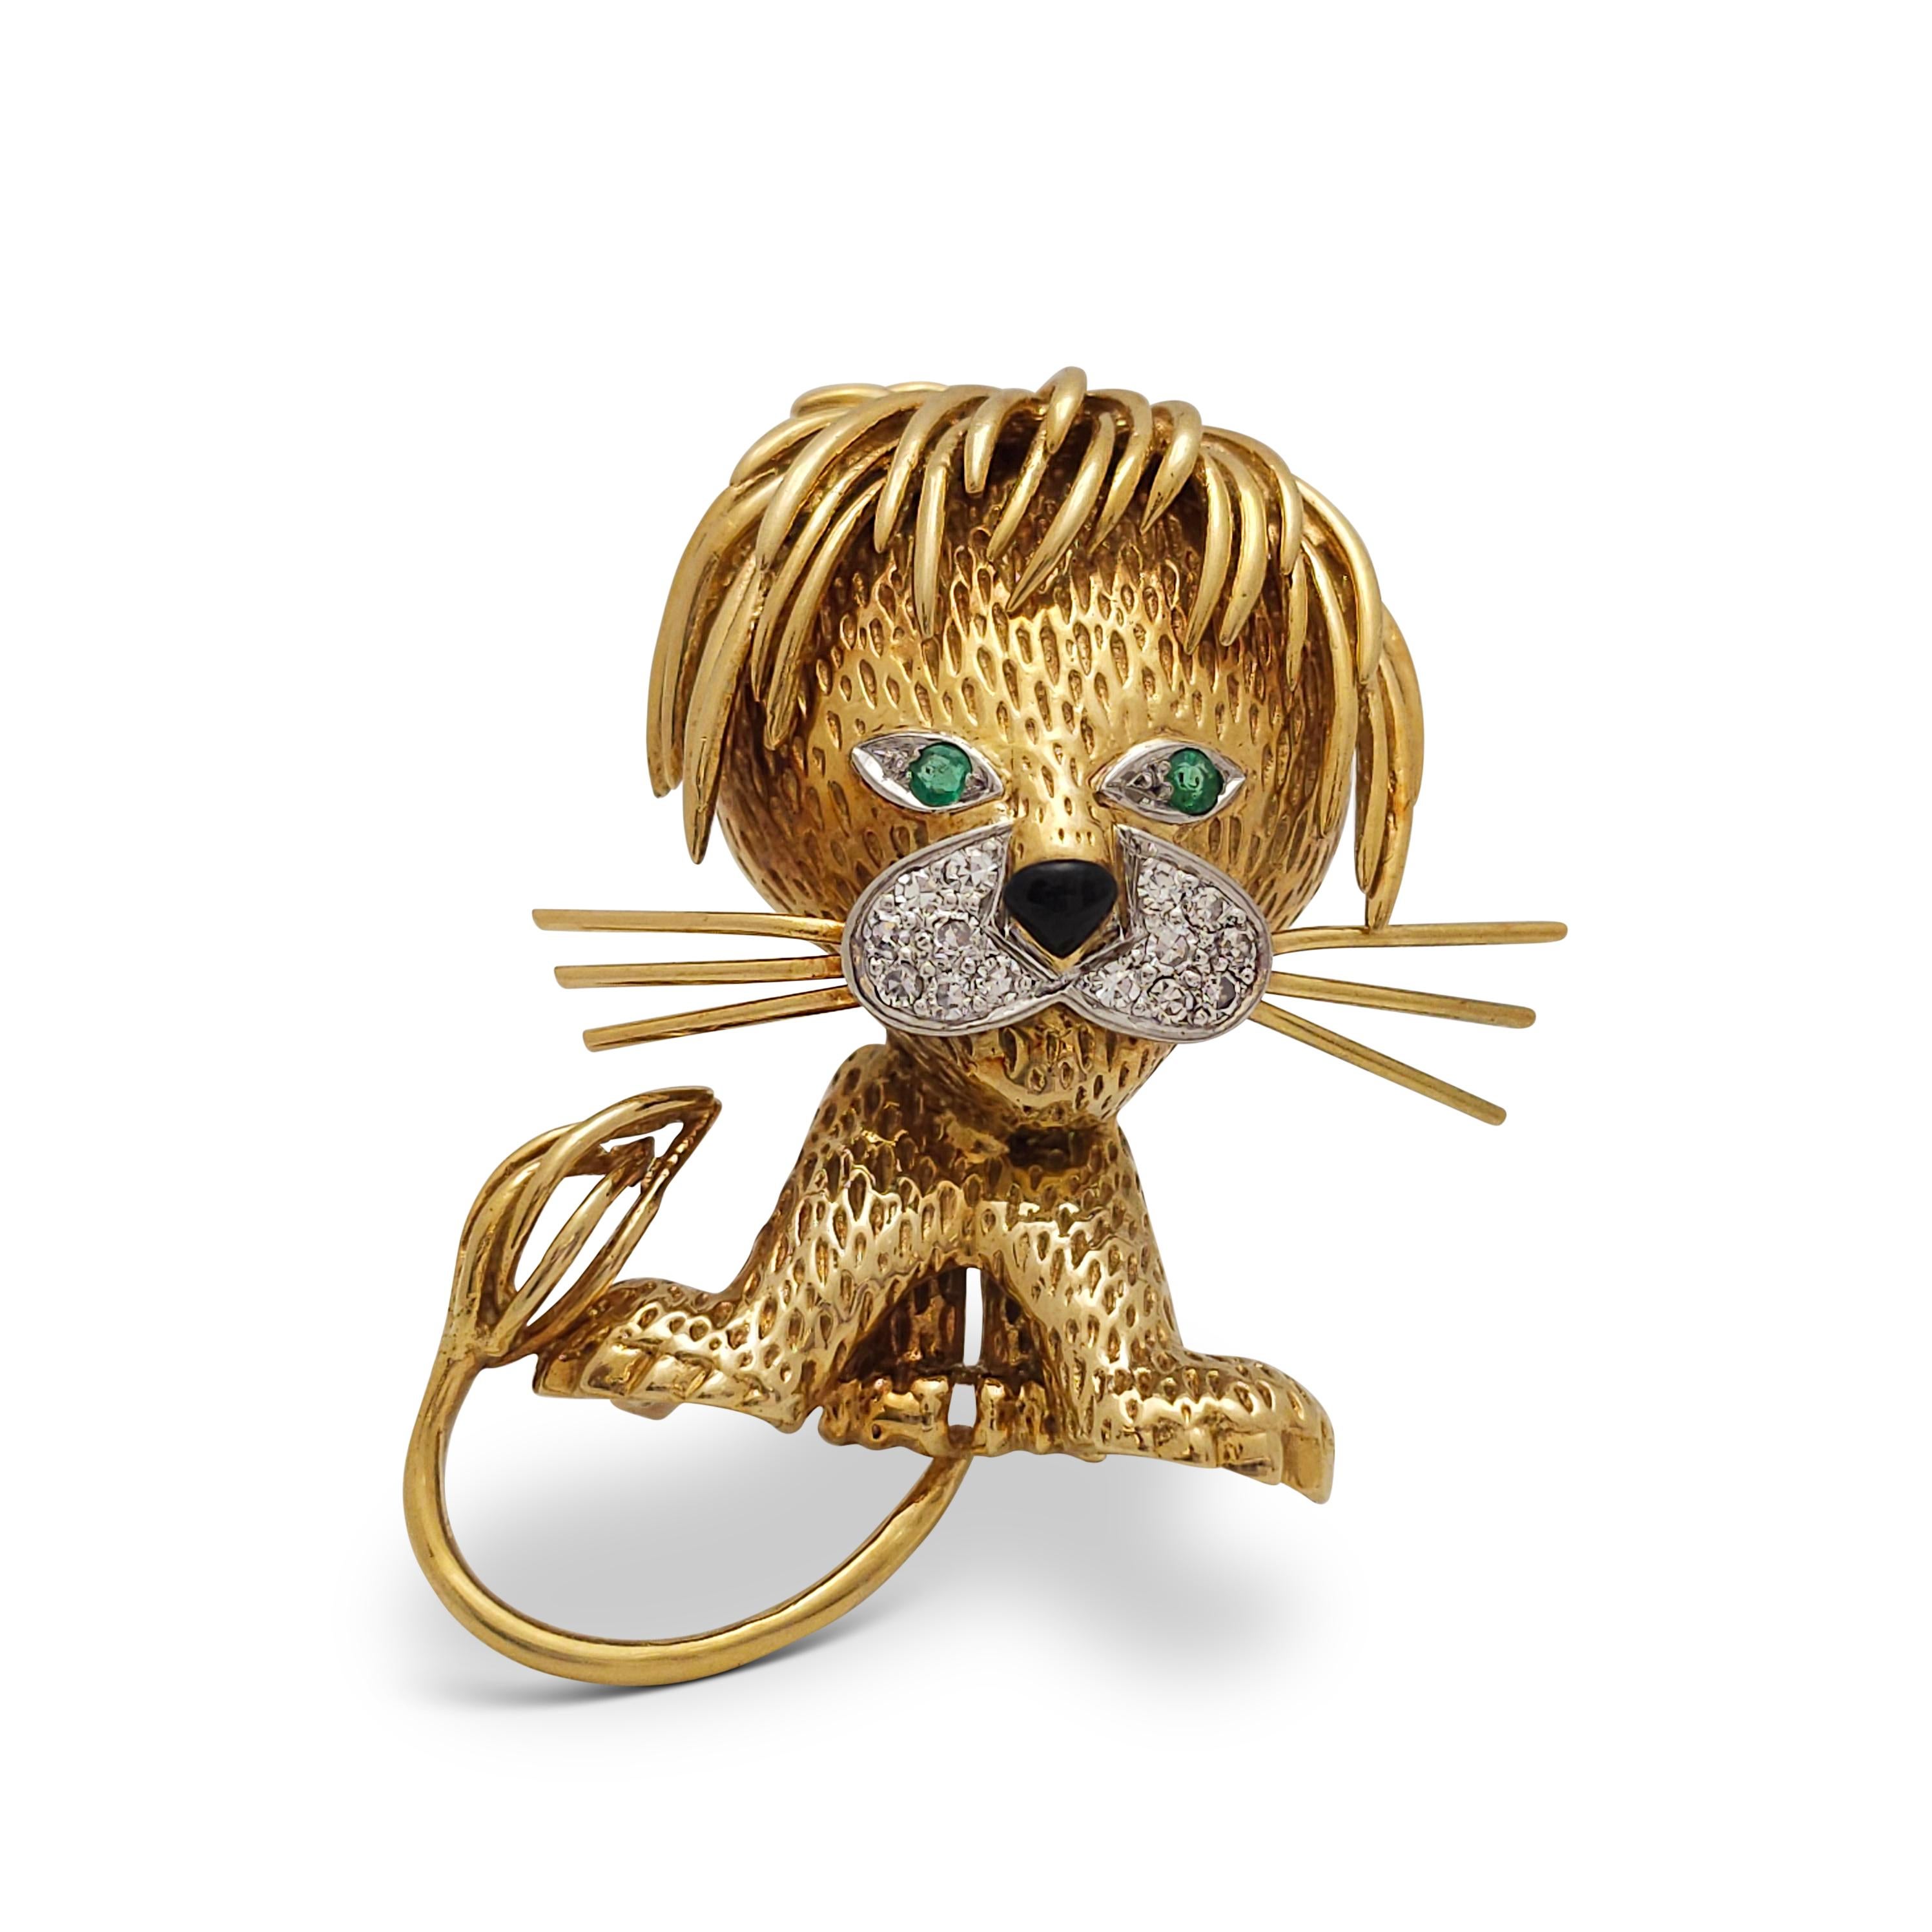 Authentic Van Cleef & Arpels 'Lion Ebouriffé' brooch crafted in 18 karat yellow gold. The iconic design depicts a lion with a playfully tousled mane, lively emerald eyes, onyx nose, and diamond muzzle of approximately .14 carats total. The brooch